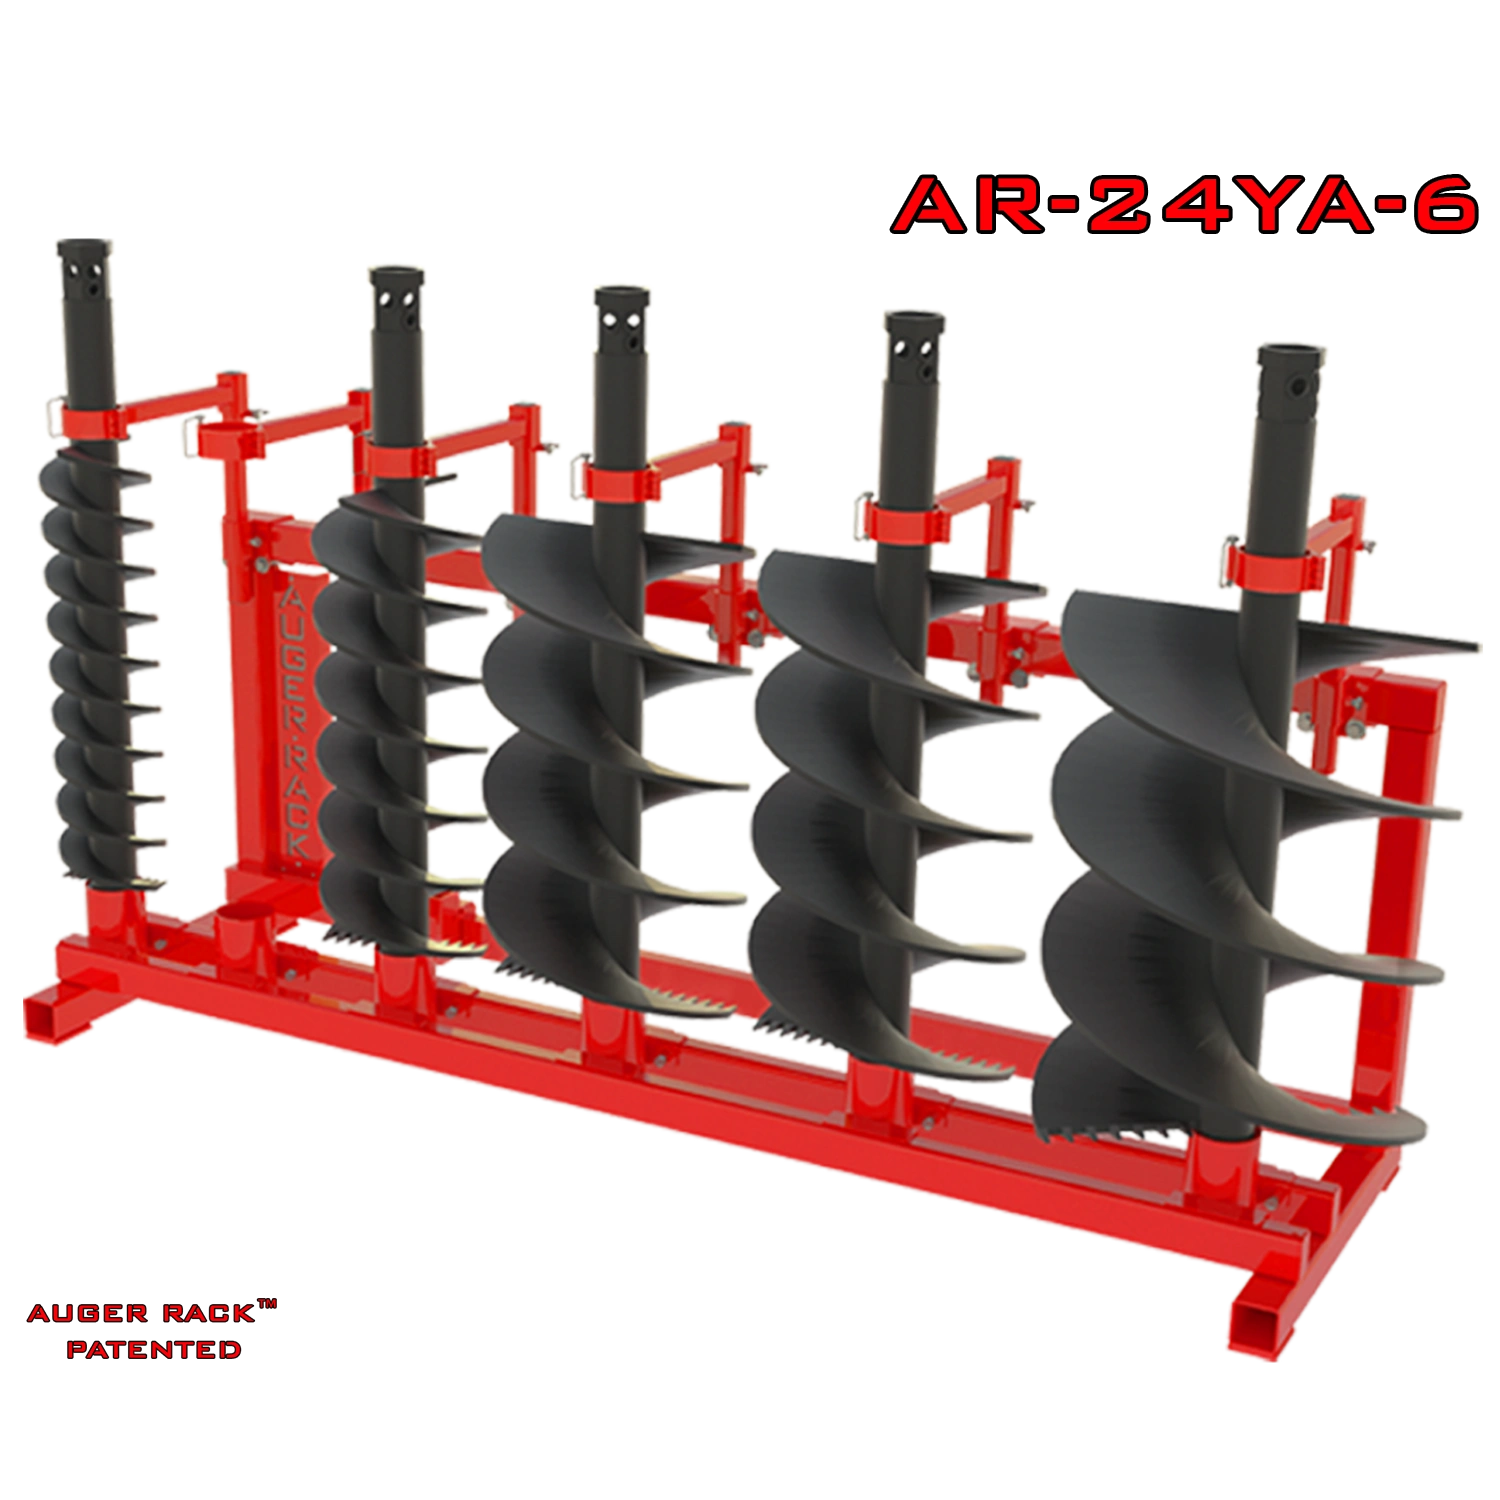 AR-24YA Yard Auger Rack for storage of 24" and smaller augers